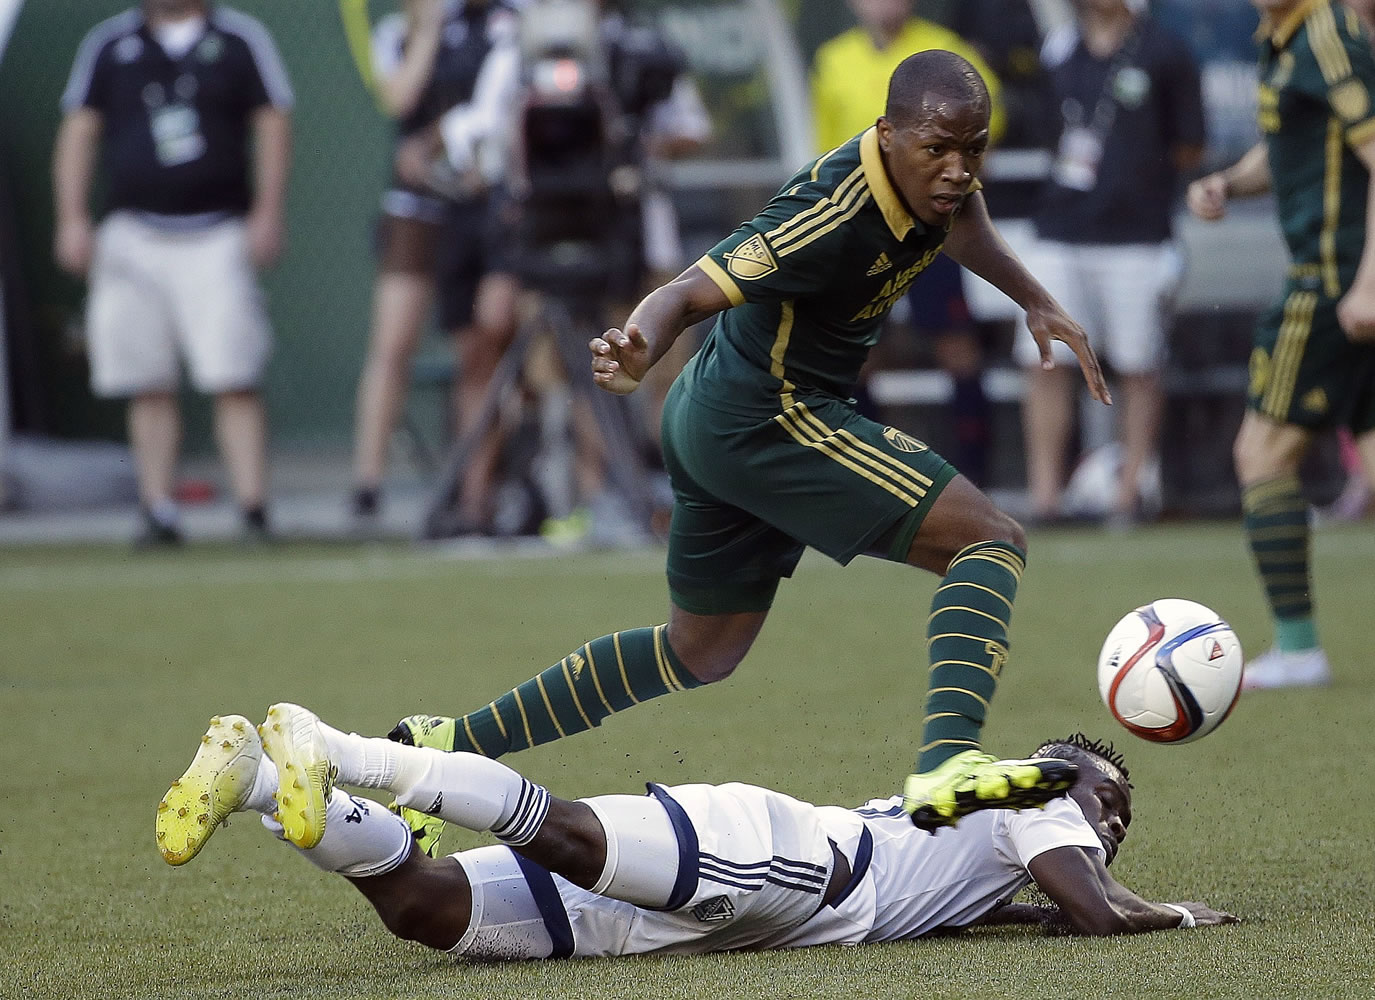 Portland Timbers forward Darlington Nagbe, top, leaps over Vancouver Whitecaps midfielder Gershon Koffie as he chases the ball during the first half of an MLS soccer game in Portland, Ore., Saturday, July 18, 2015.